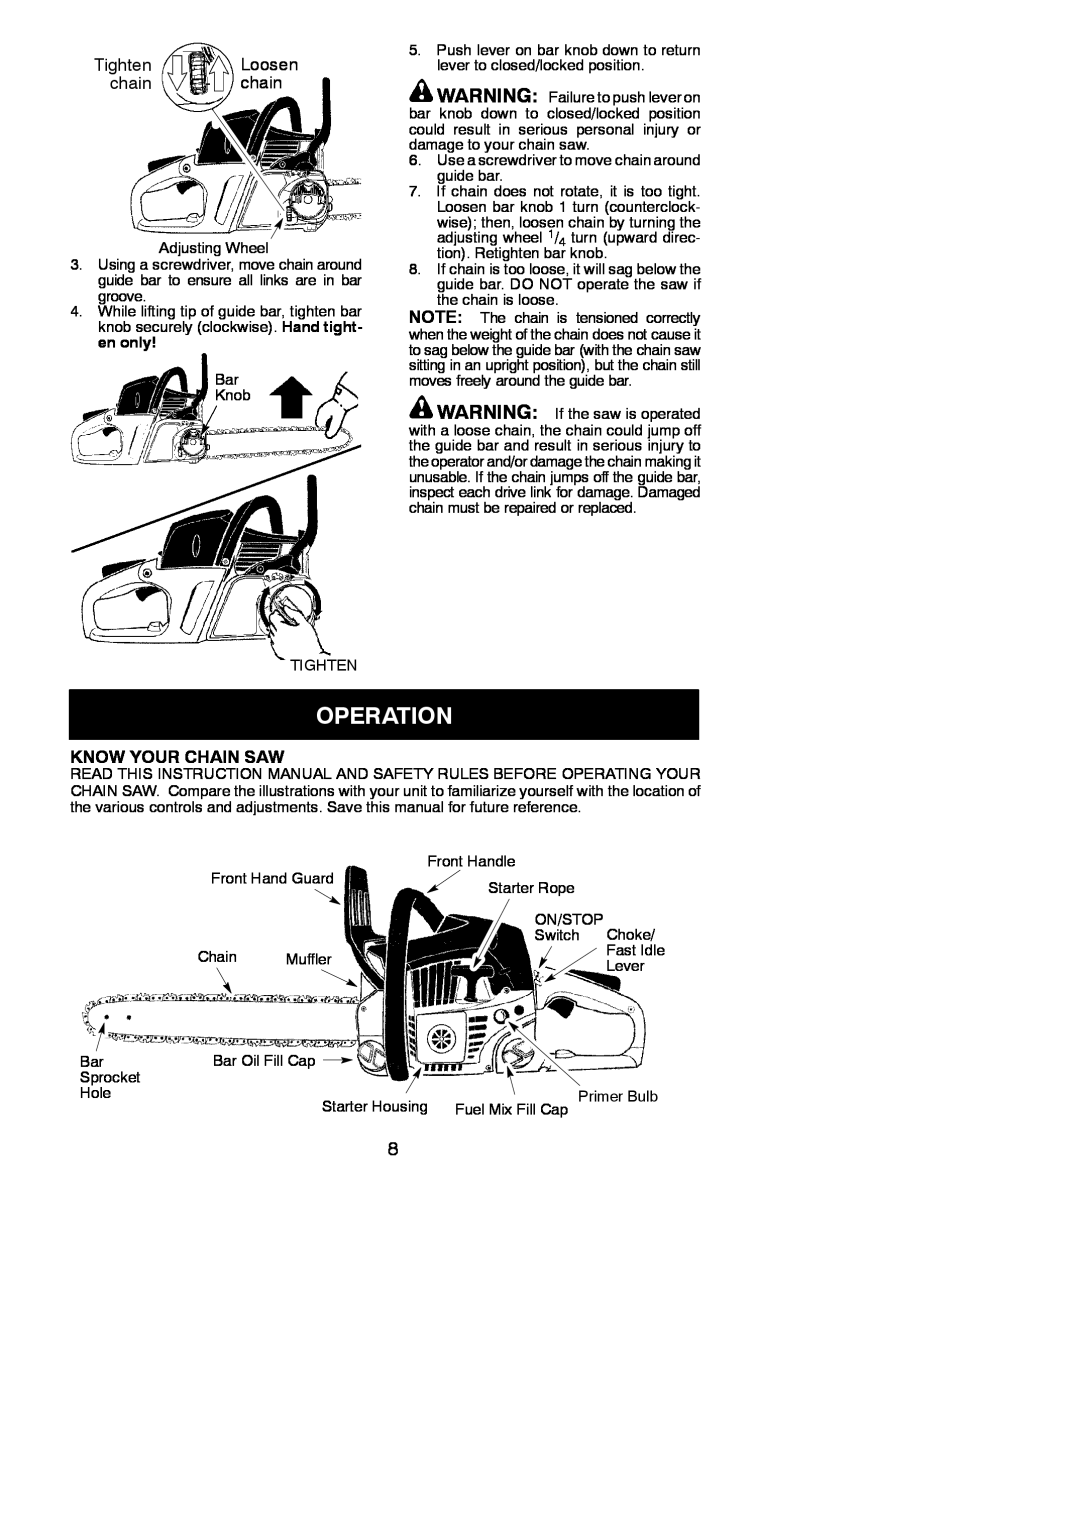 Poulan 545186807 instruction manual Operation, Tighten Loosen chain chain, Know Your Chain Saw 